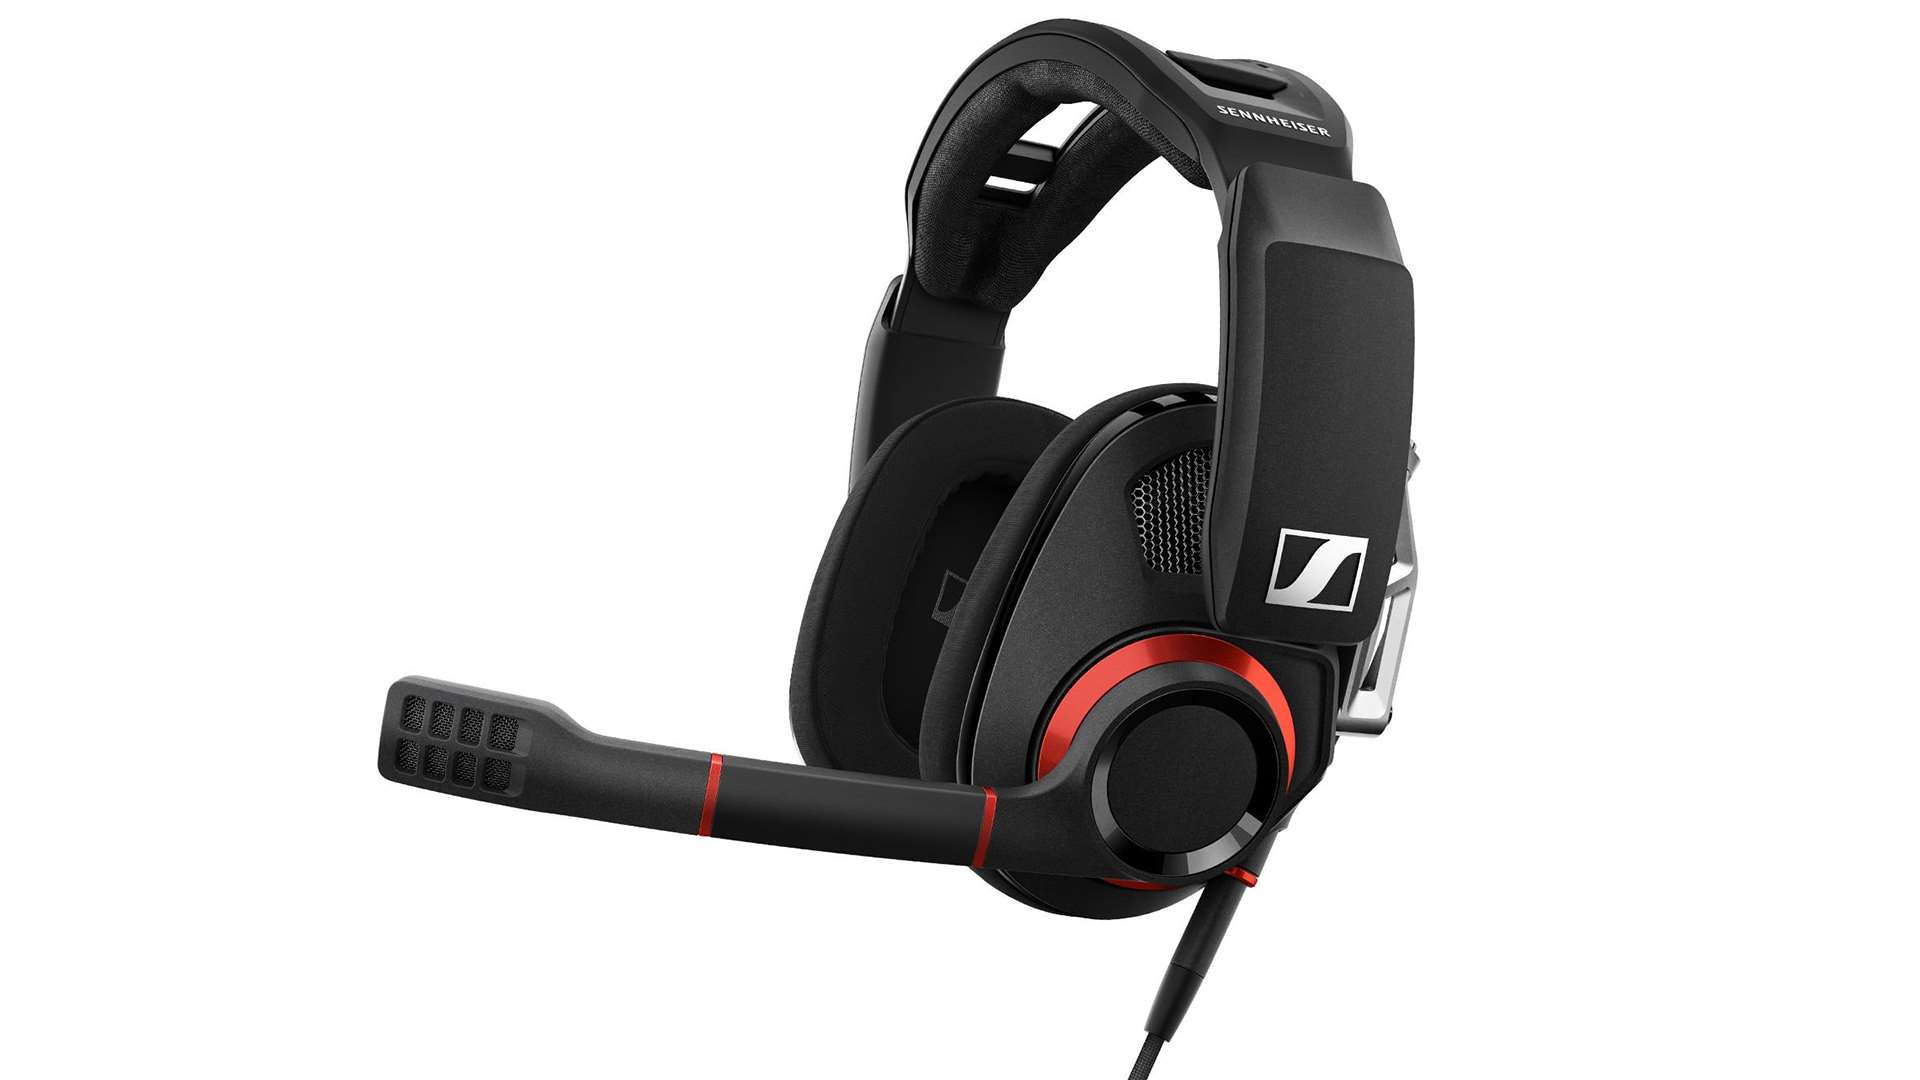 The best headset for bass is the Sennheiser GSP 500